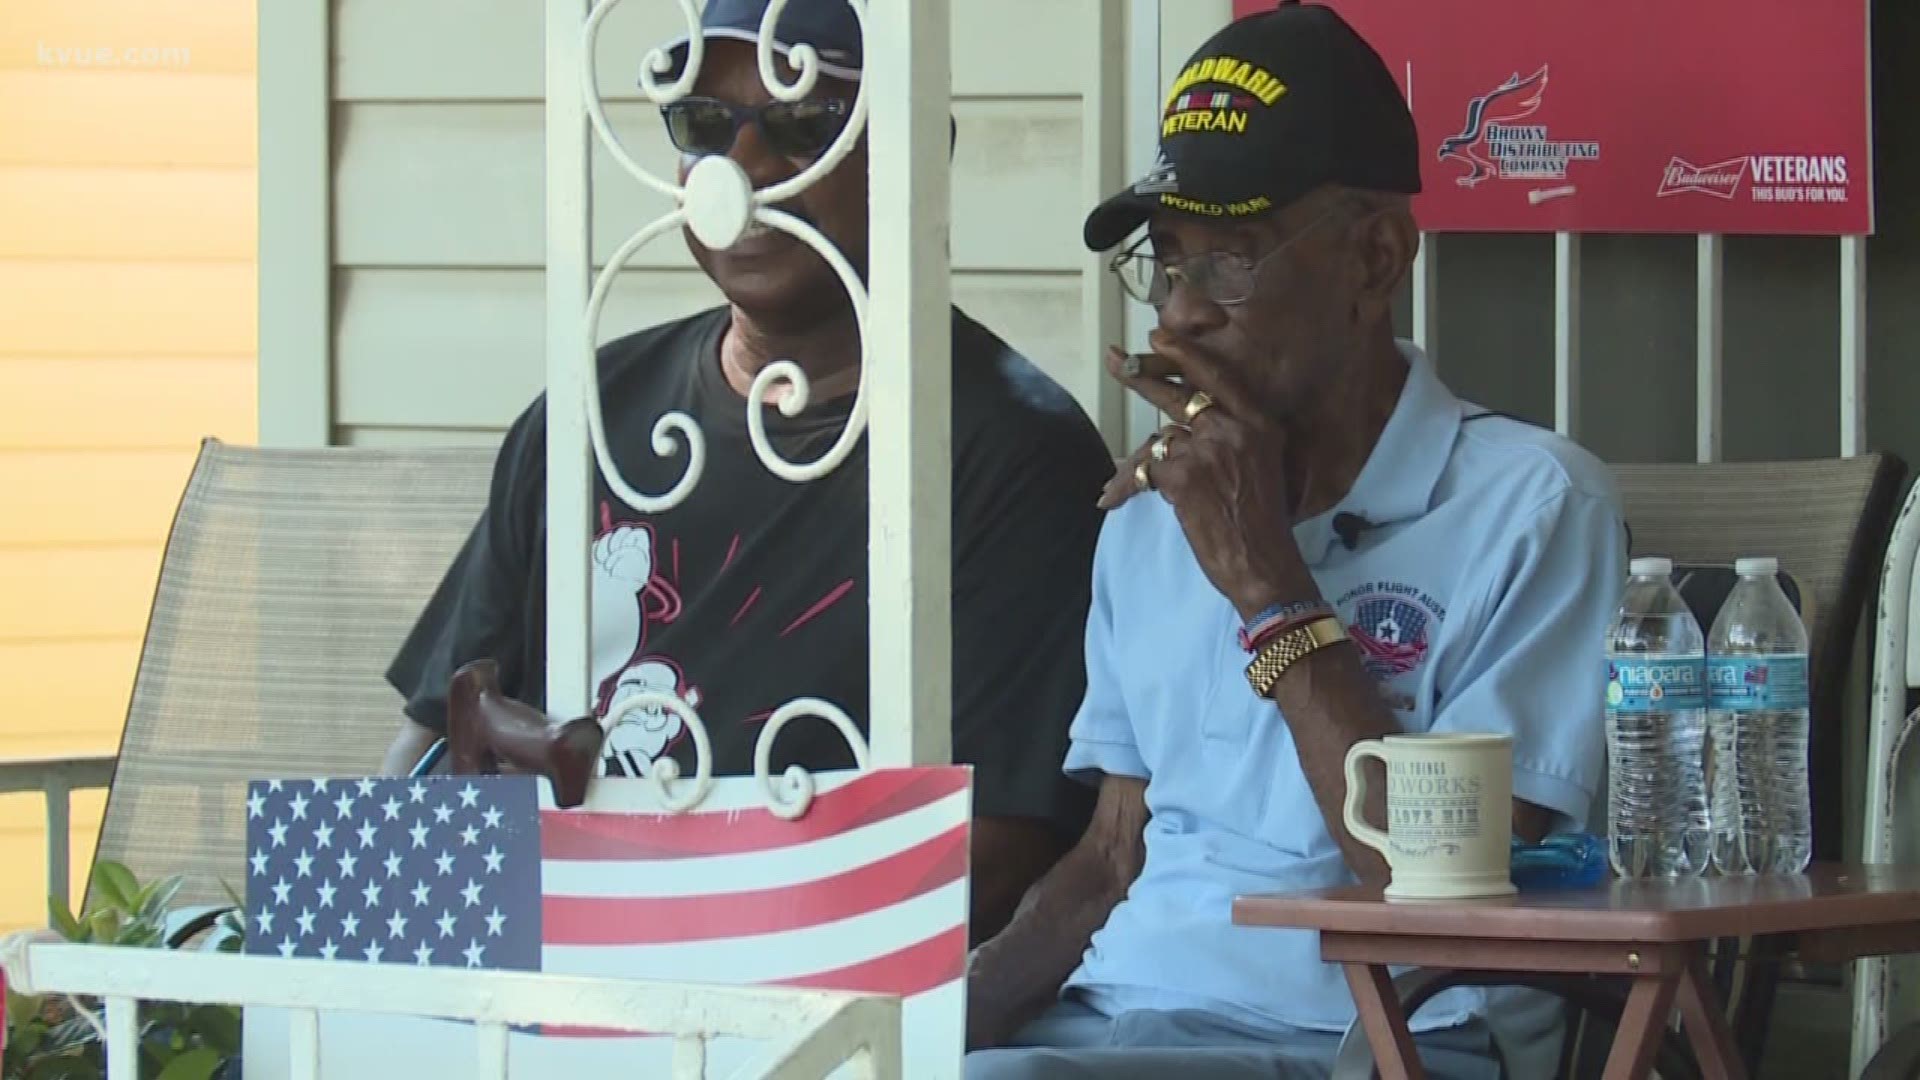 Police are looking into who's responsible for stealing money from the oldest living WWII veteran.